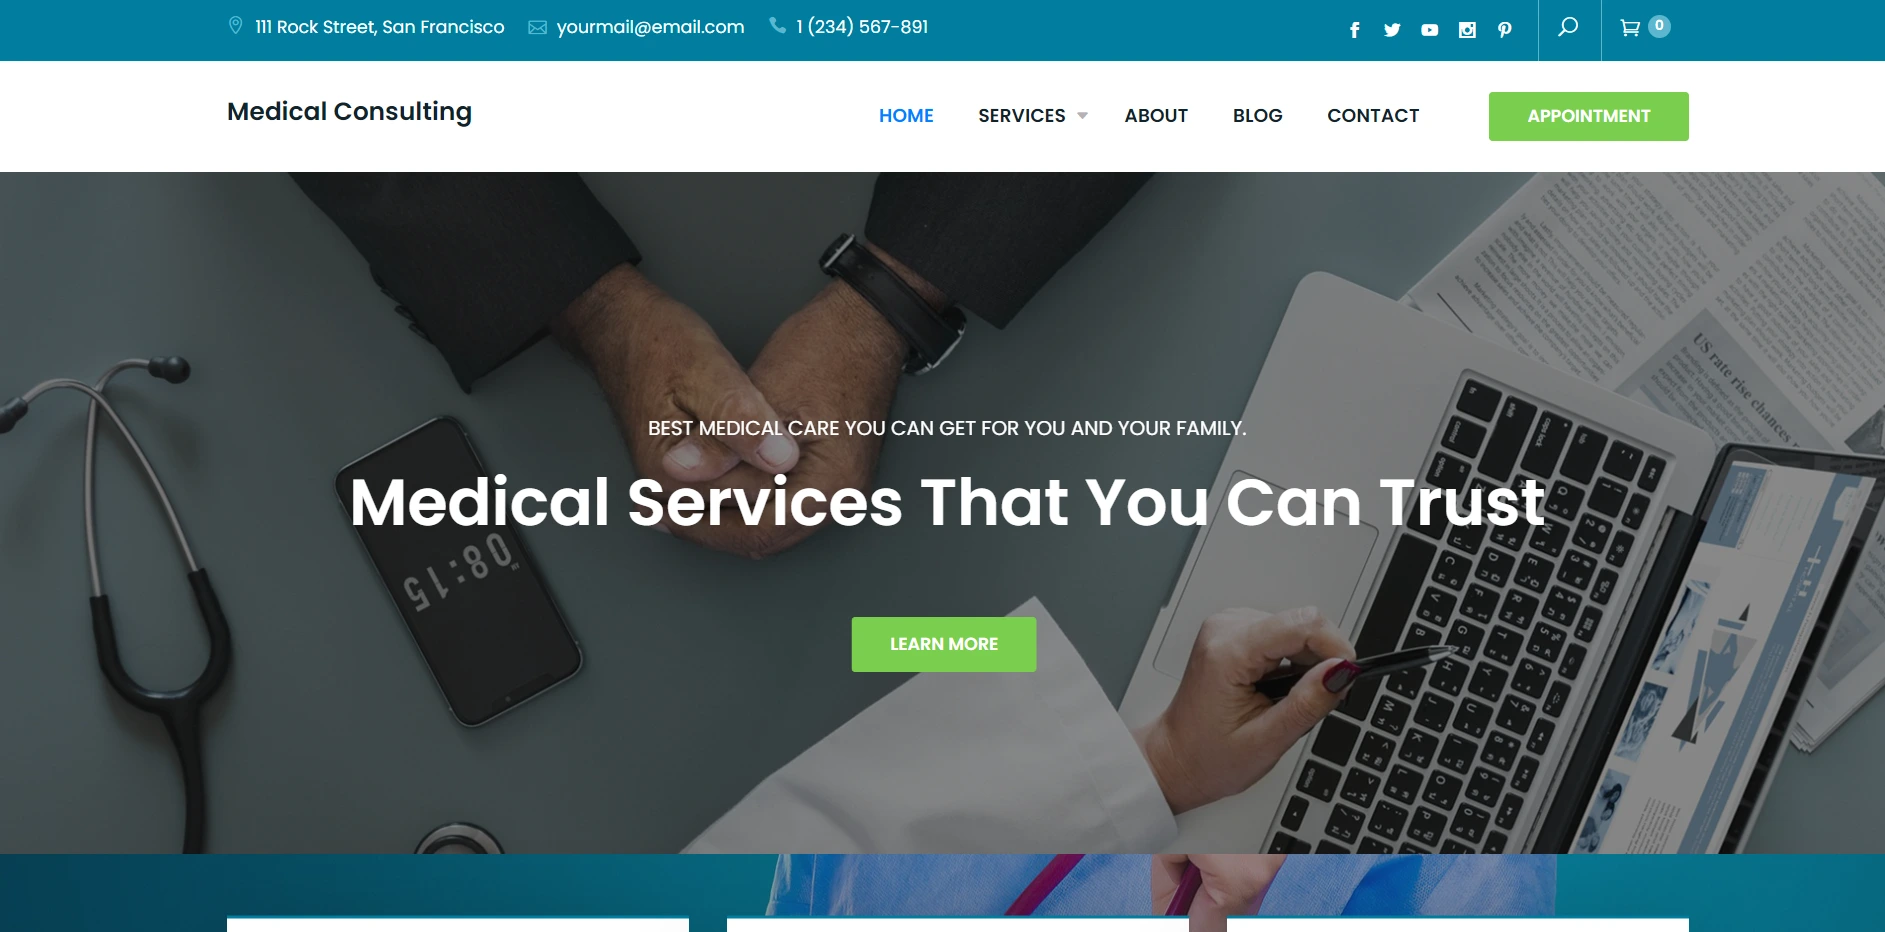 Medical consulting theme